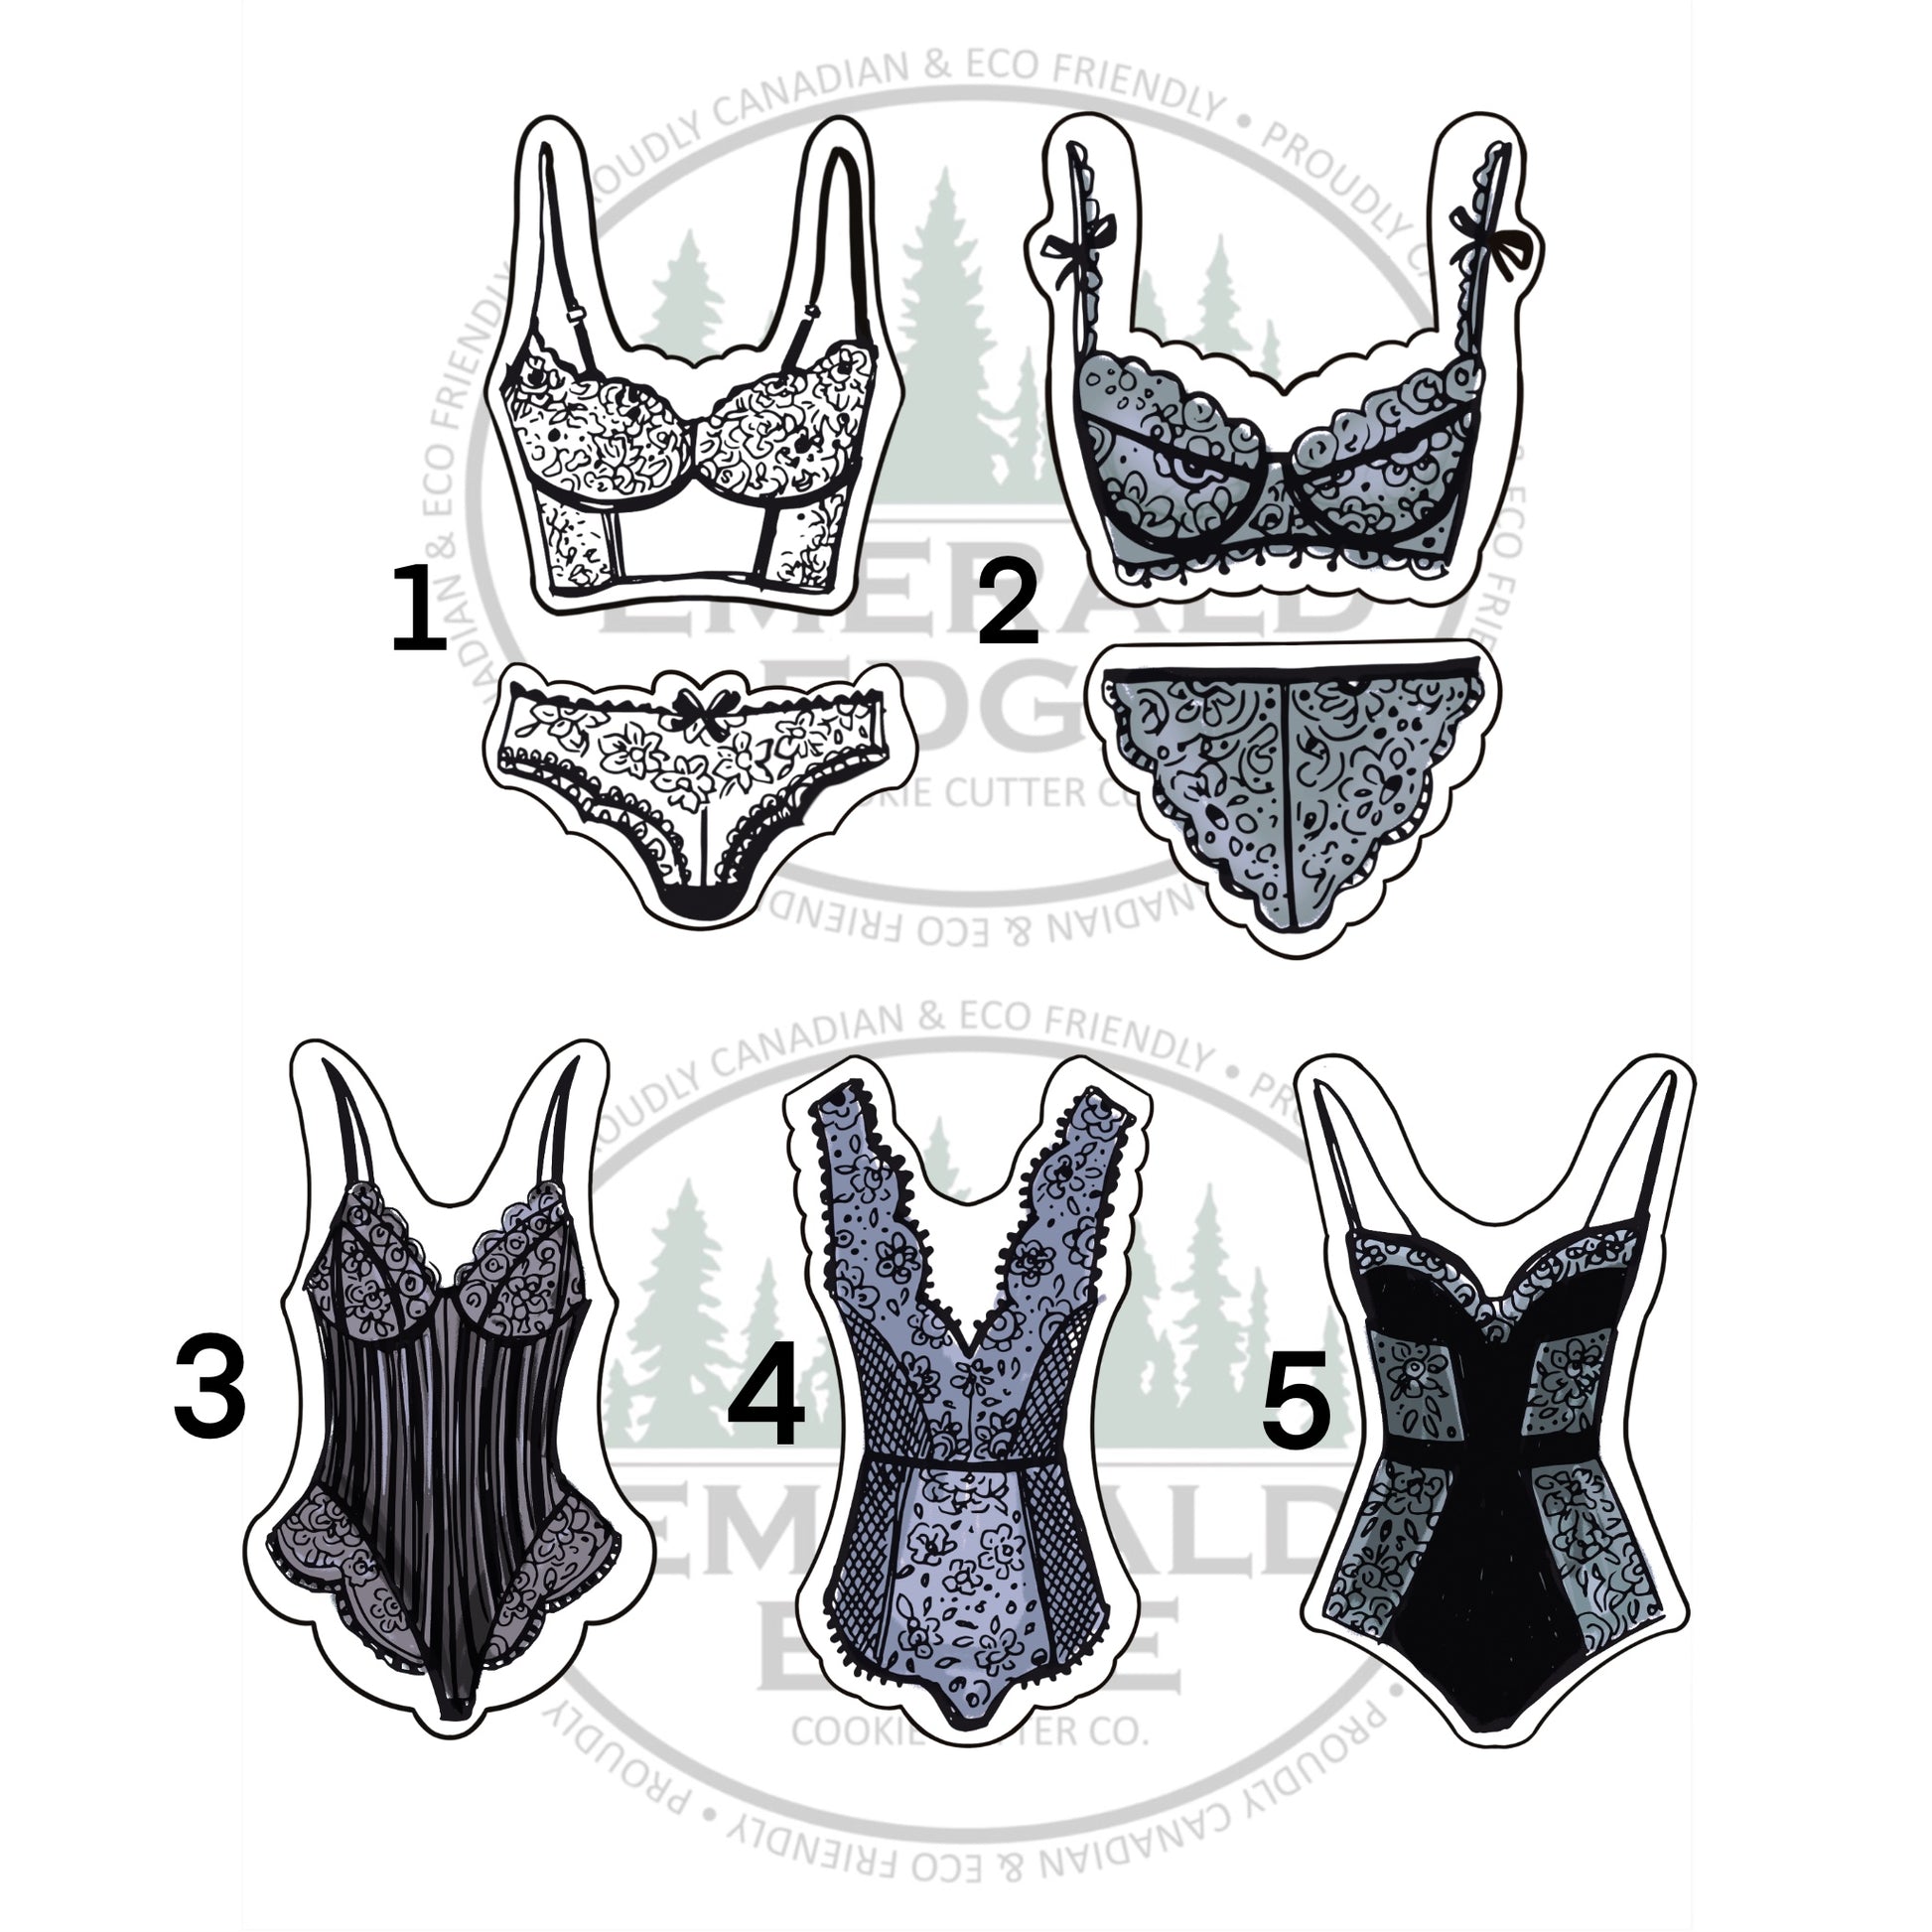 Lingerie – The Emerald Edge Cookie Cutter Co.